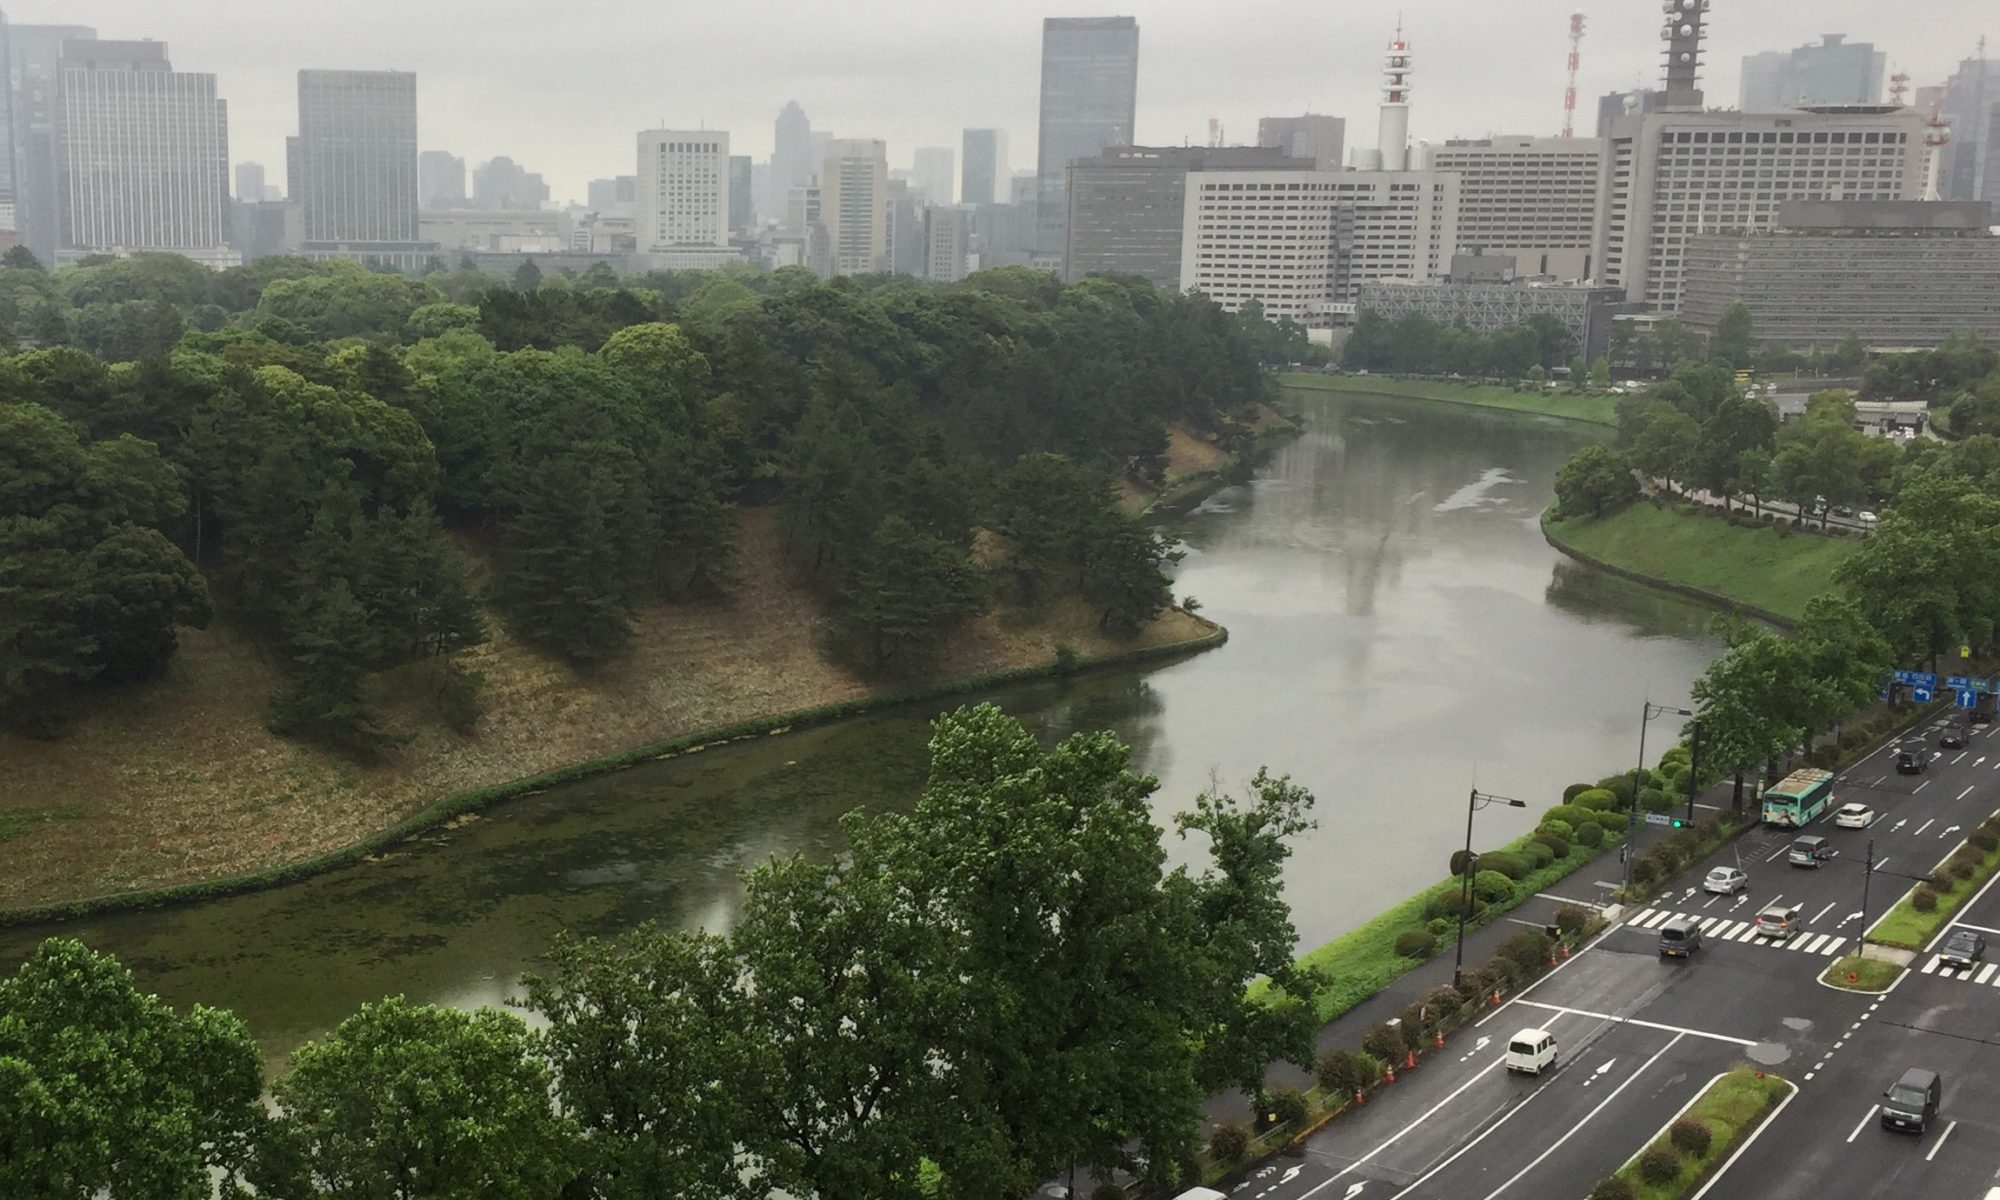 View of the Imperial Palace from our Hotel window